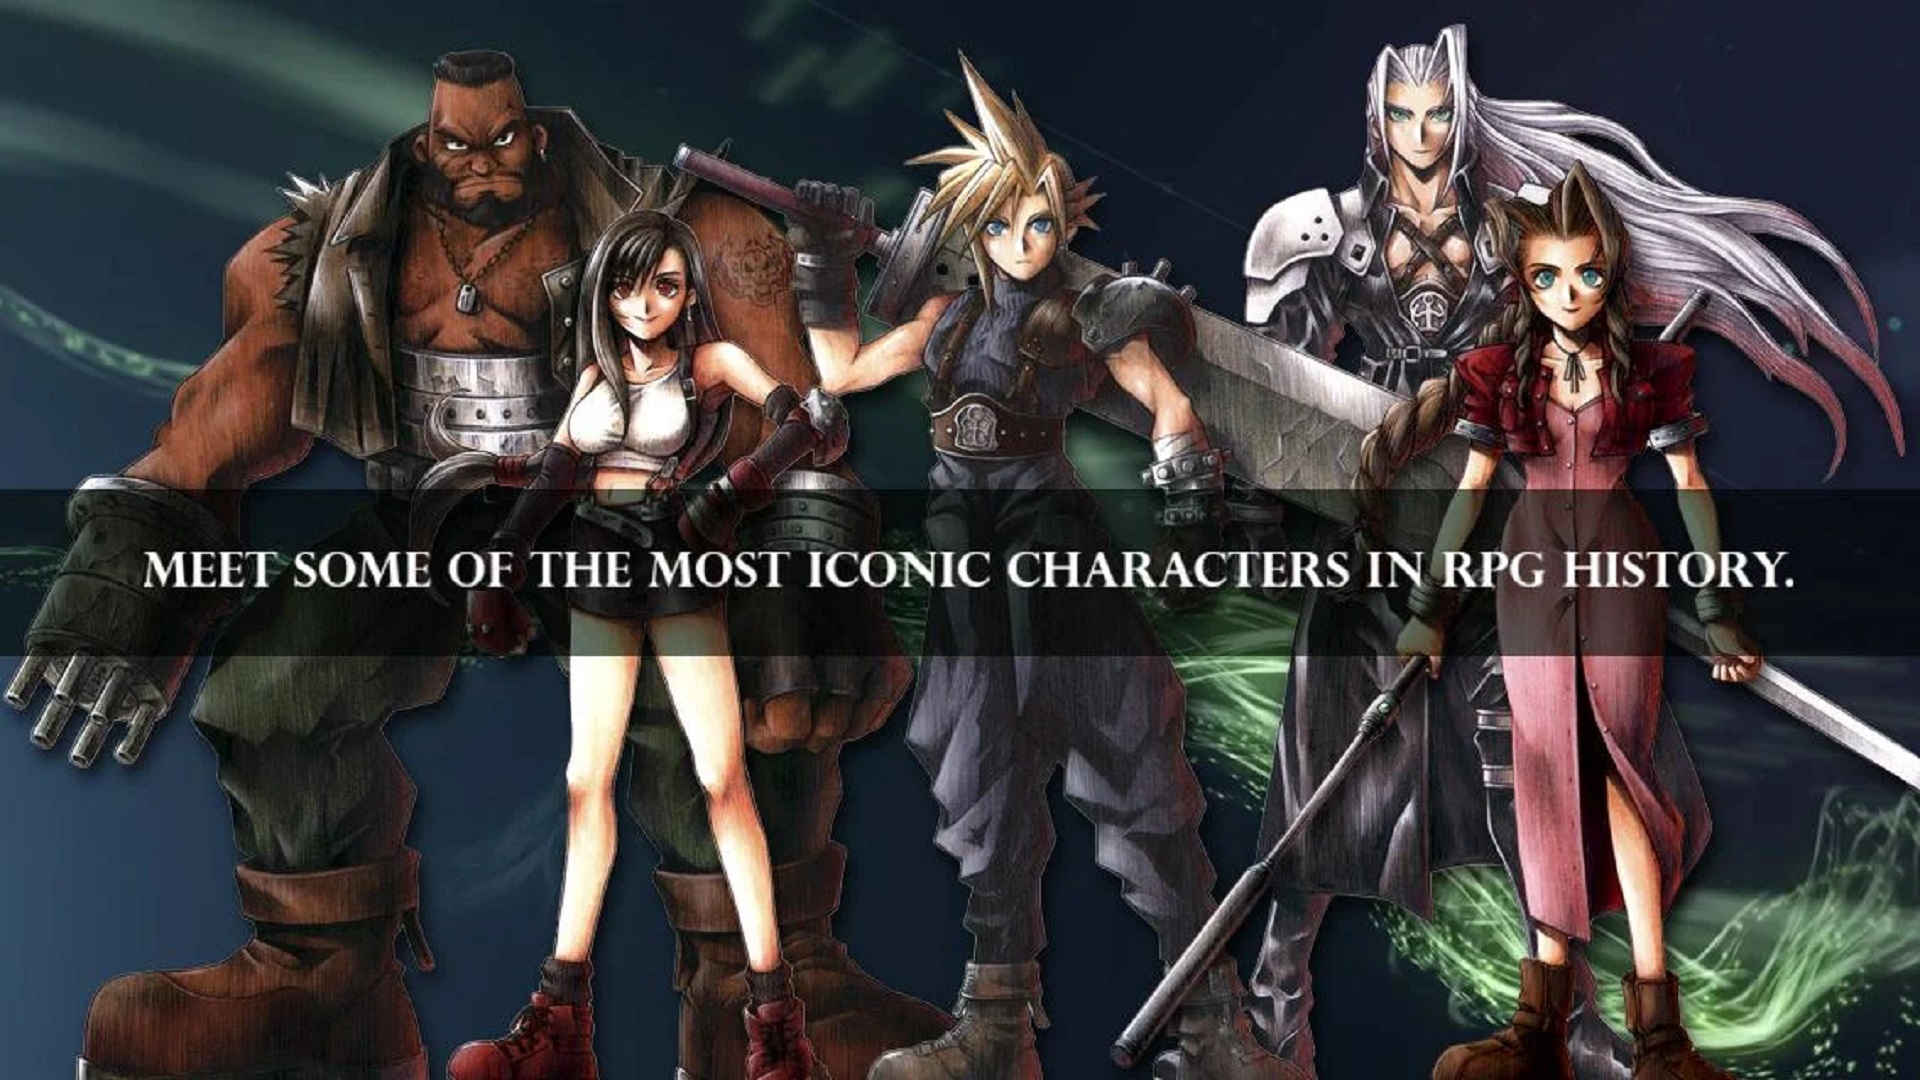 Best mobile RPGs: Final Fantasy VII. image shows the game's cast and text that reads "Meet some of the most iconic characters in RPG history".